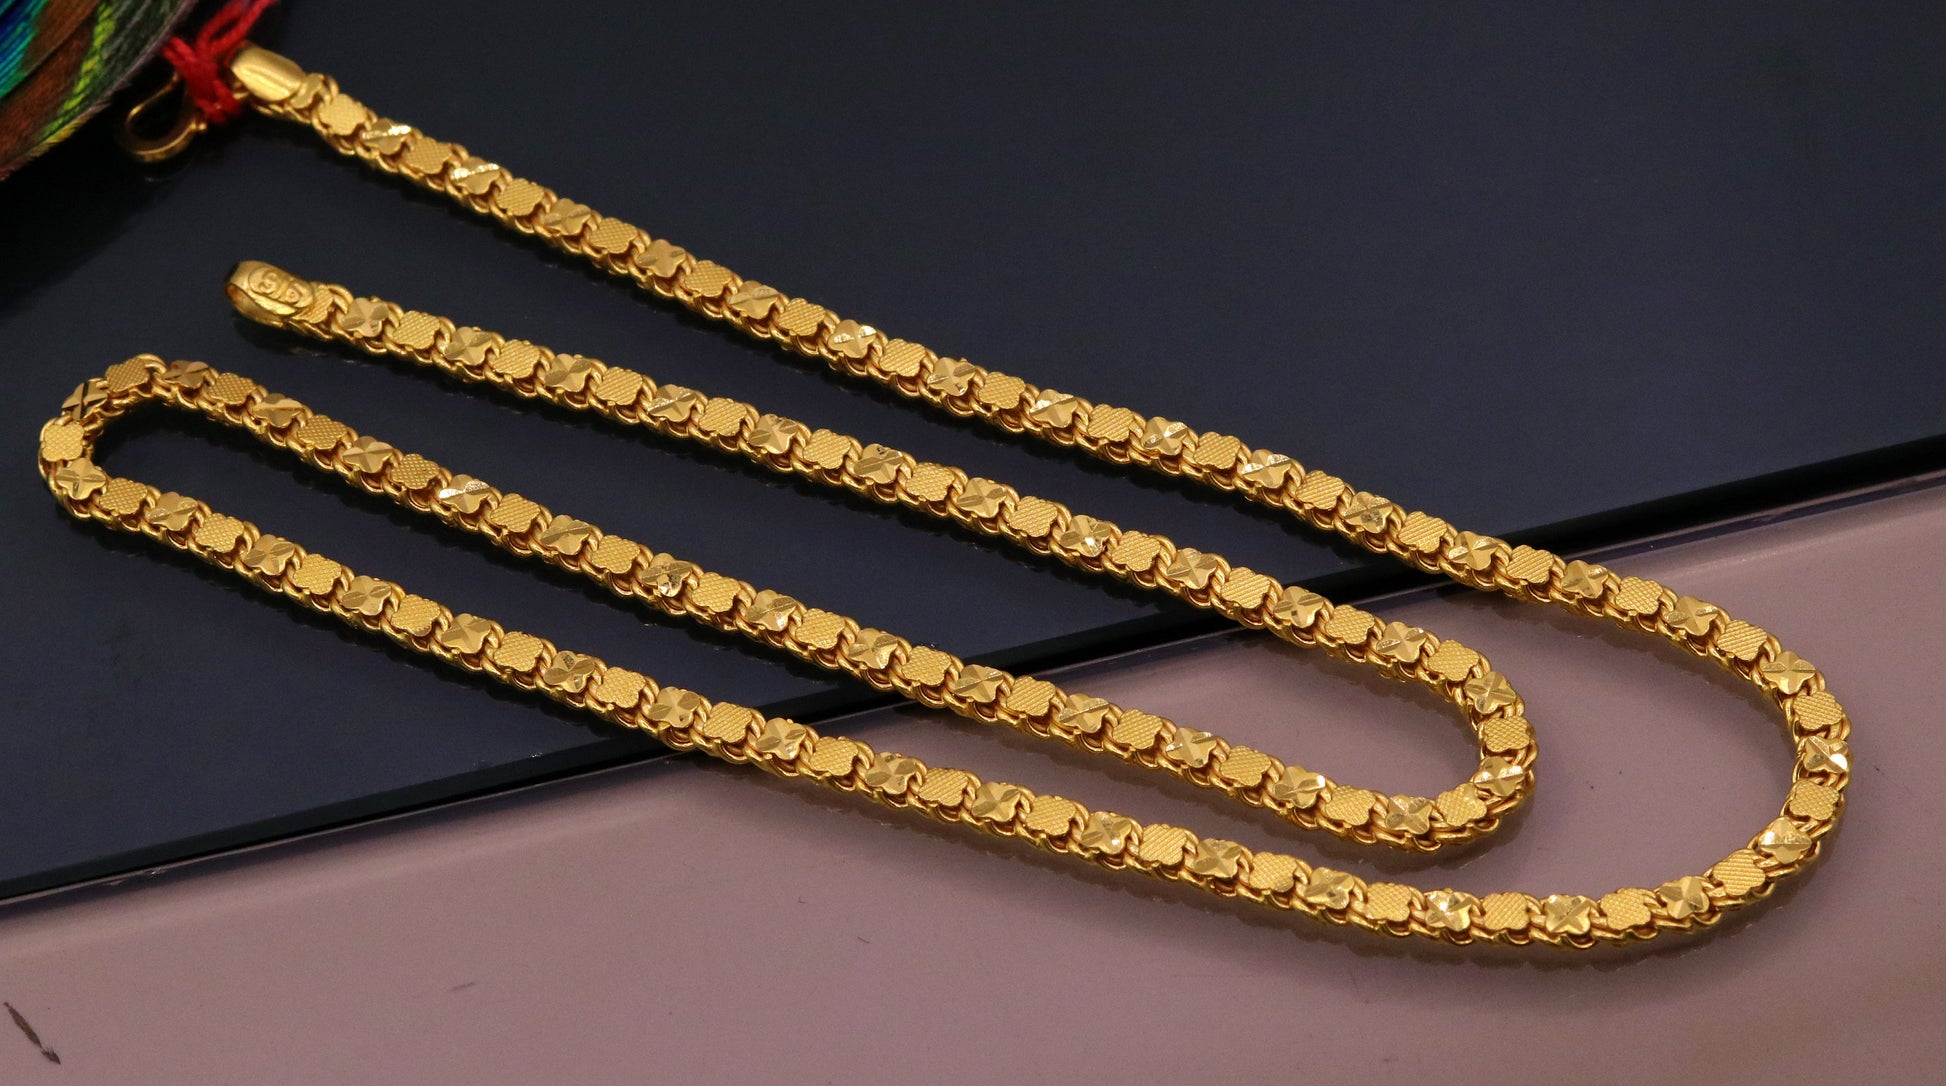 Gorgeous 22kt yellow gold solid excellent design chain necklace handcrafted Indian jewelry gifting ideas ch214 - TRIBAL ORNAMENTS